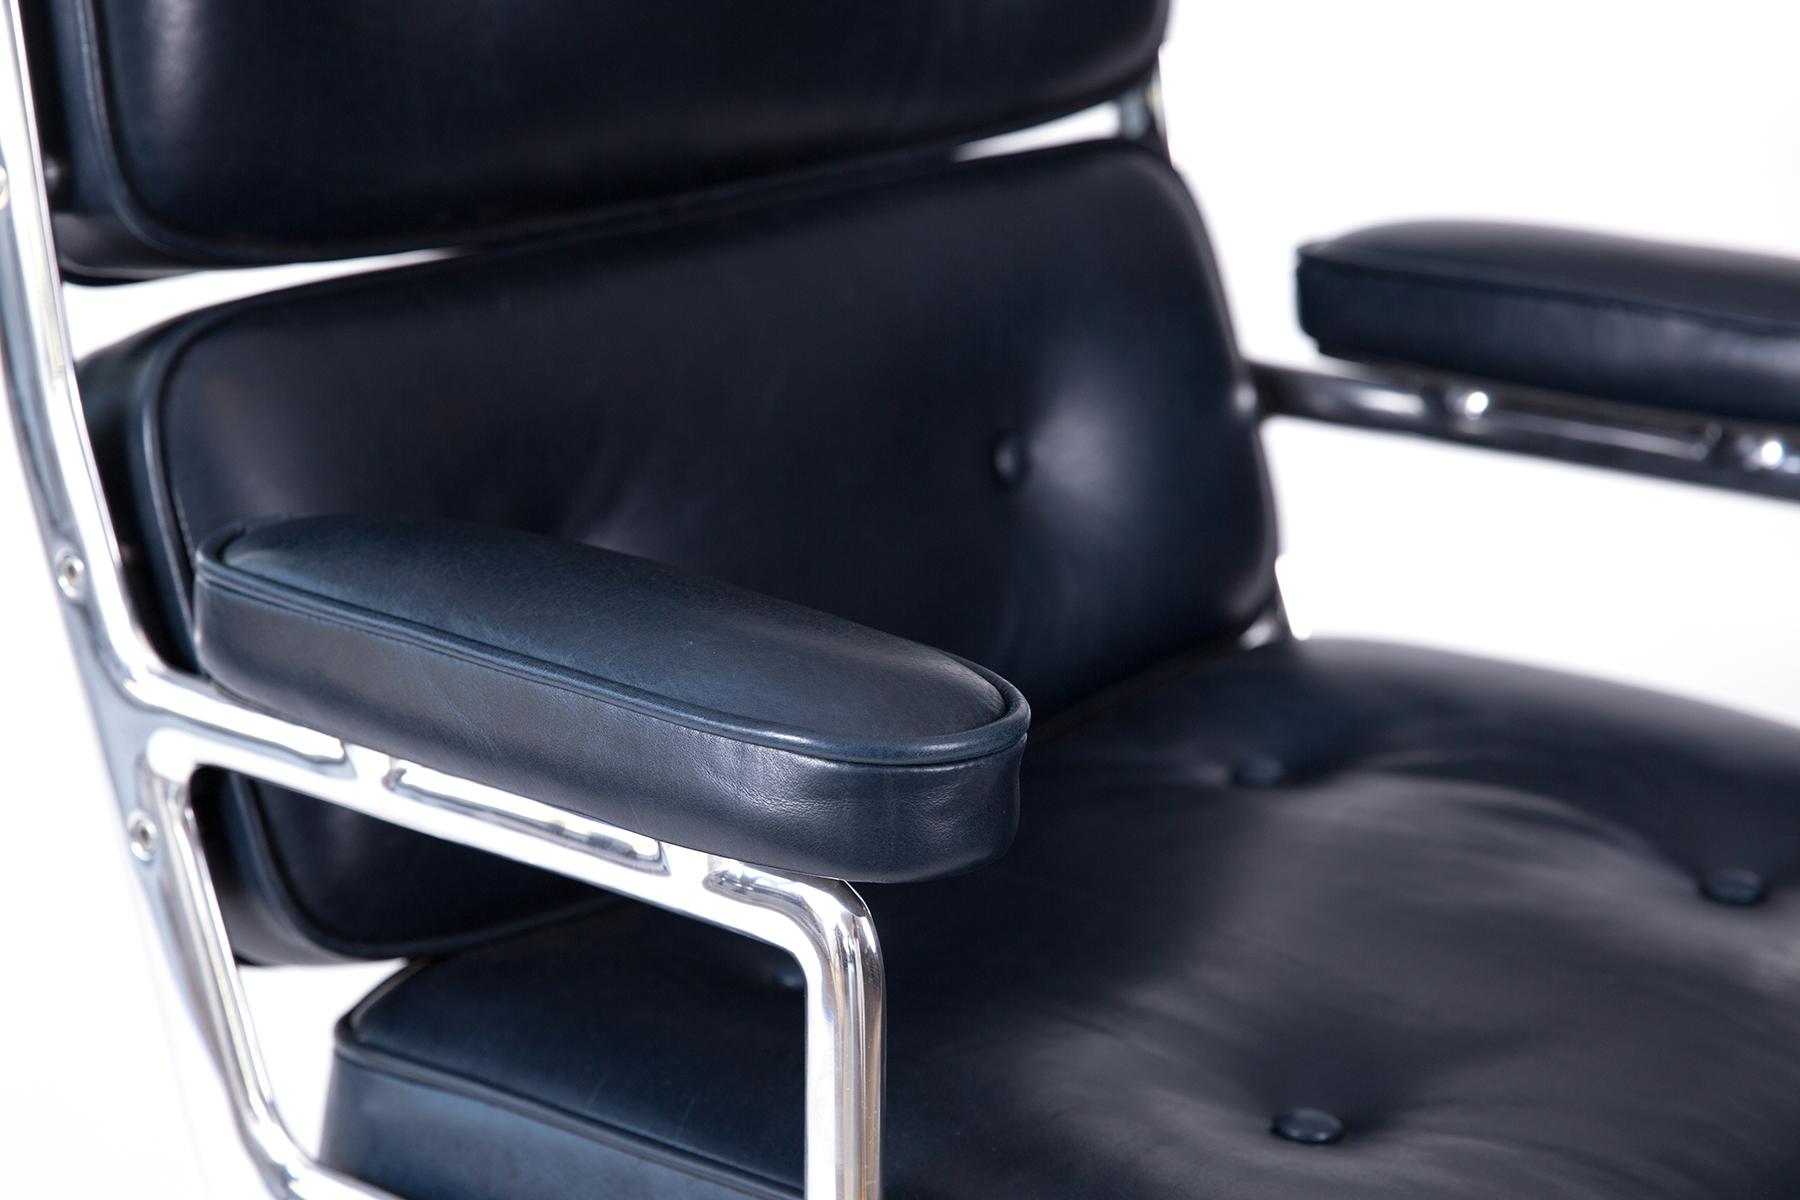 North American Eames Executive Office Chair